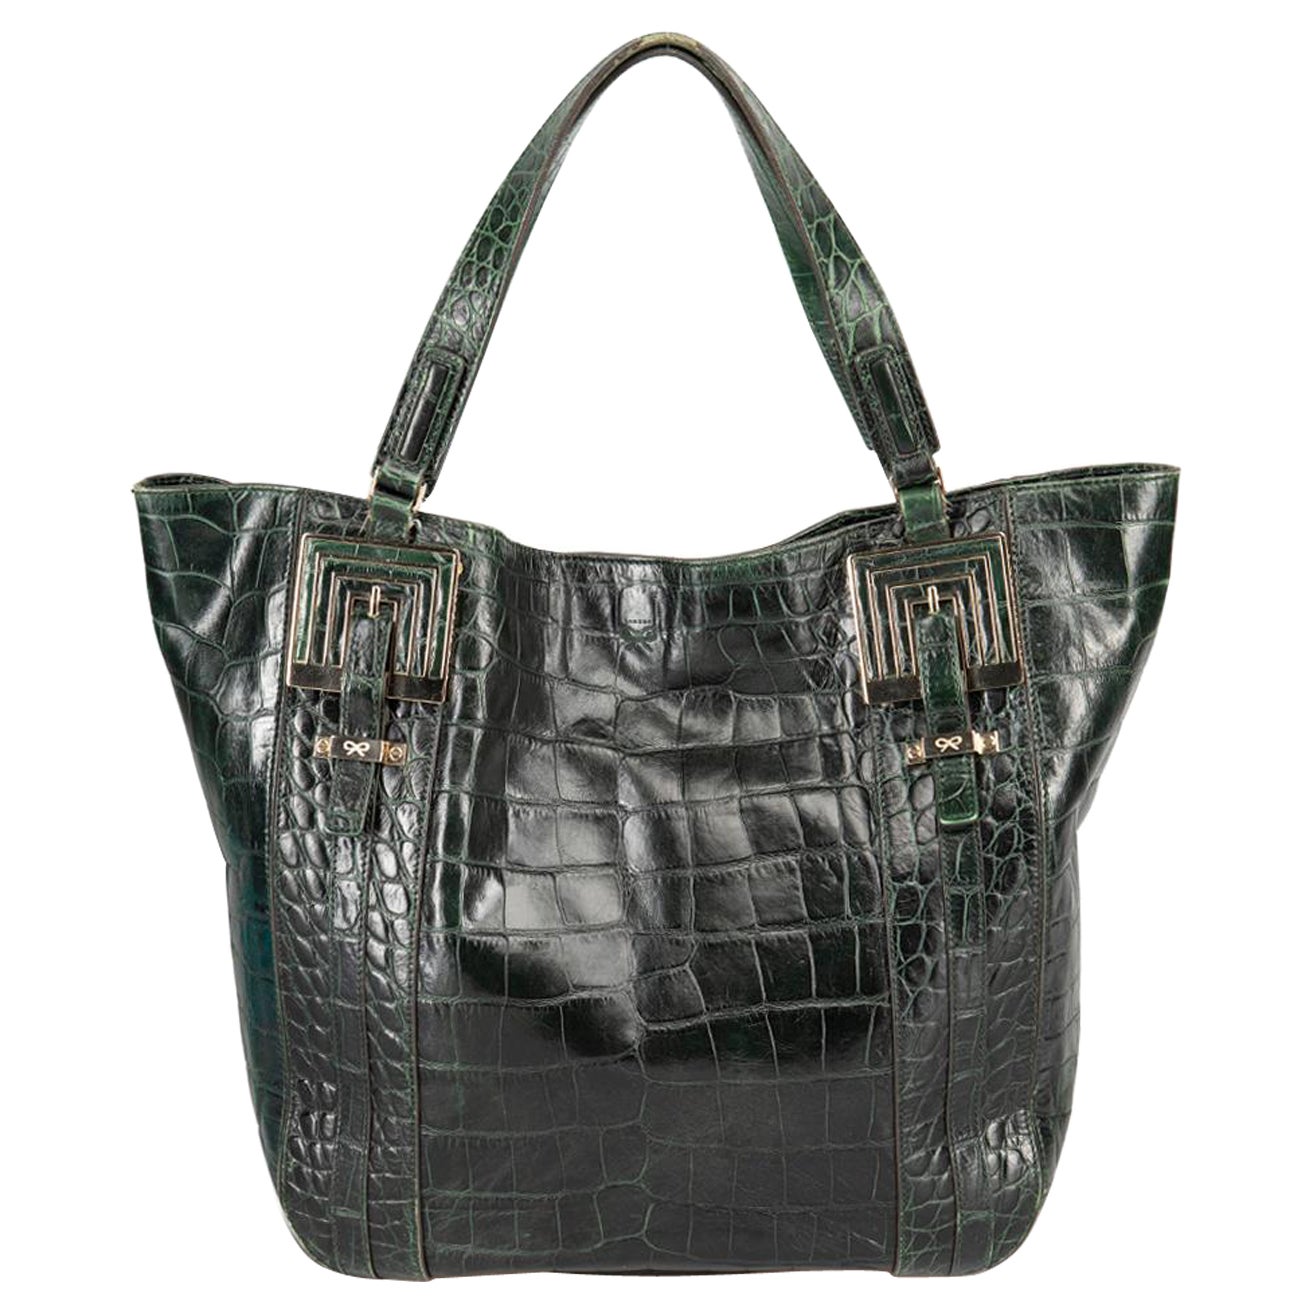 Anya Hindmarch Green Leather Croc Embossed Tote